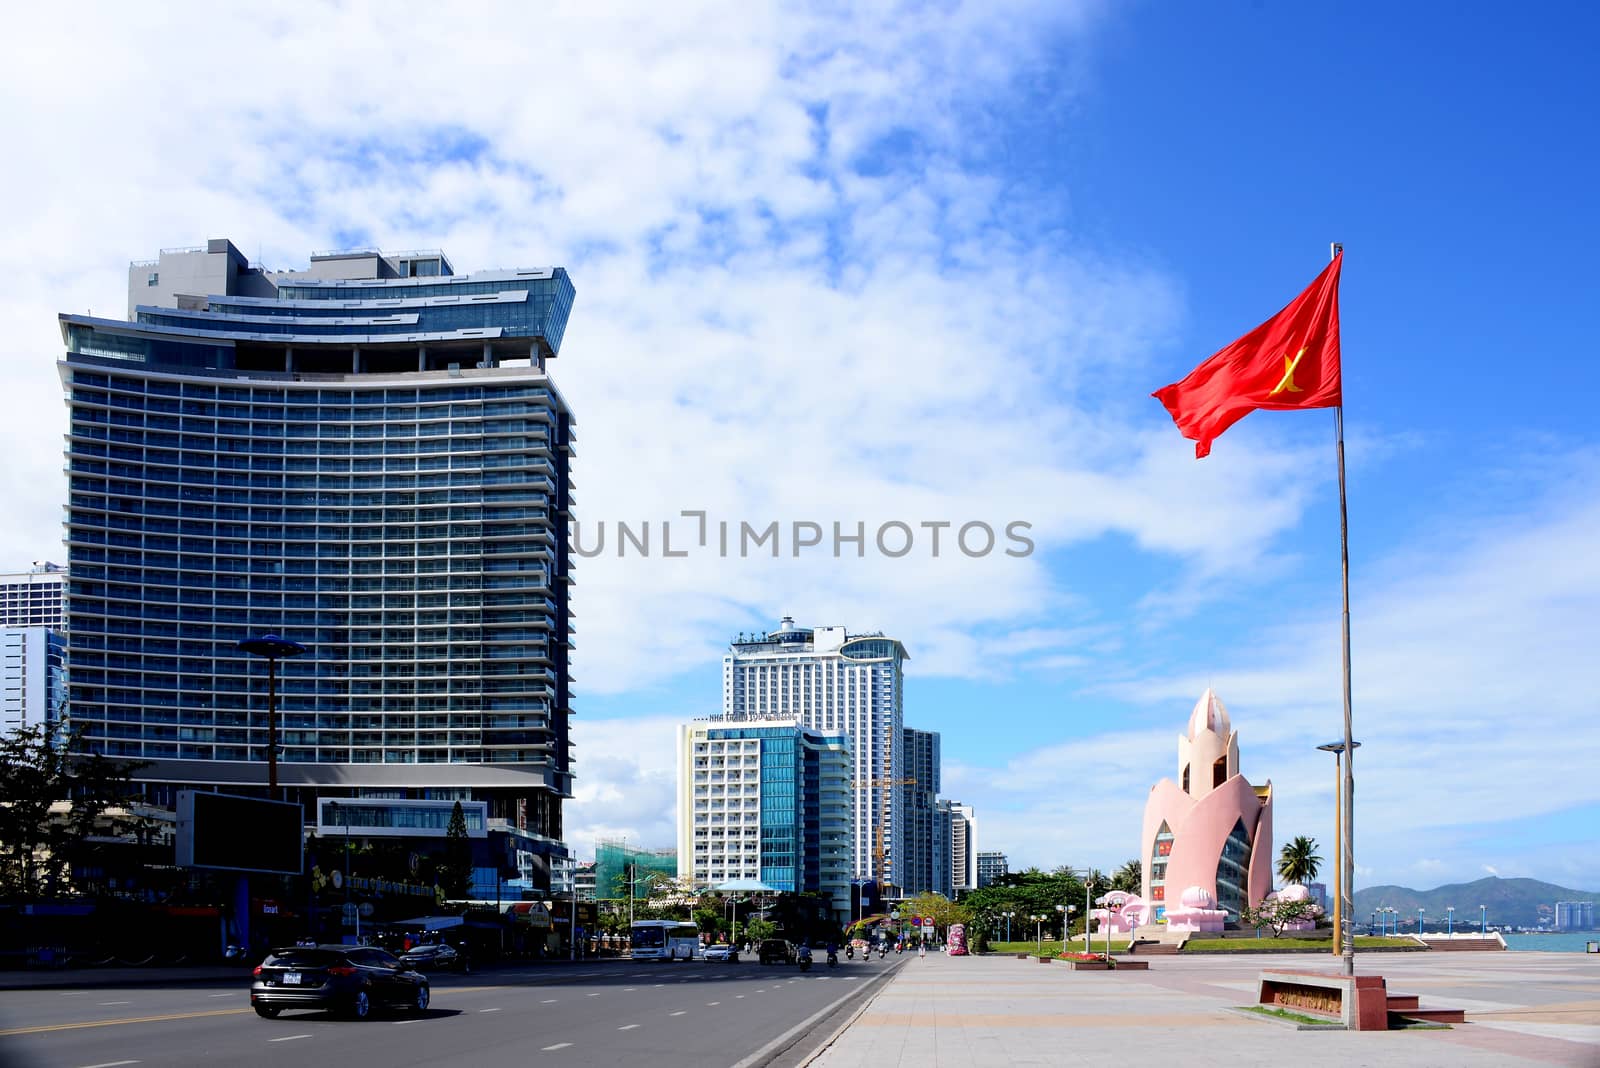 Tram Huong Tower, which is located in the center of the city, is considered as the symbol of Nha Trang city by ideation90